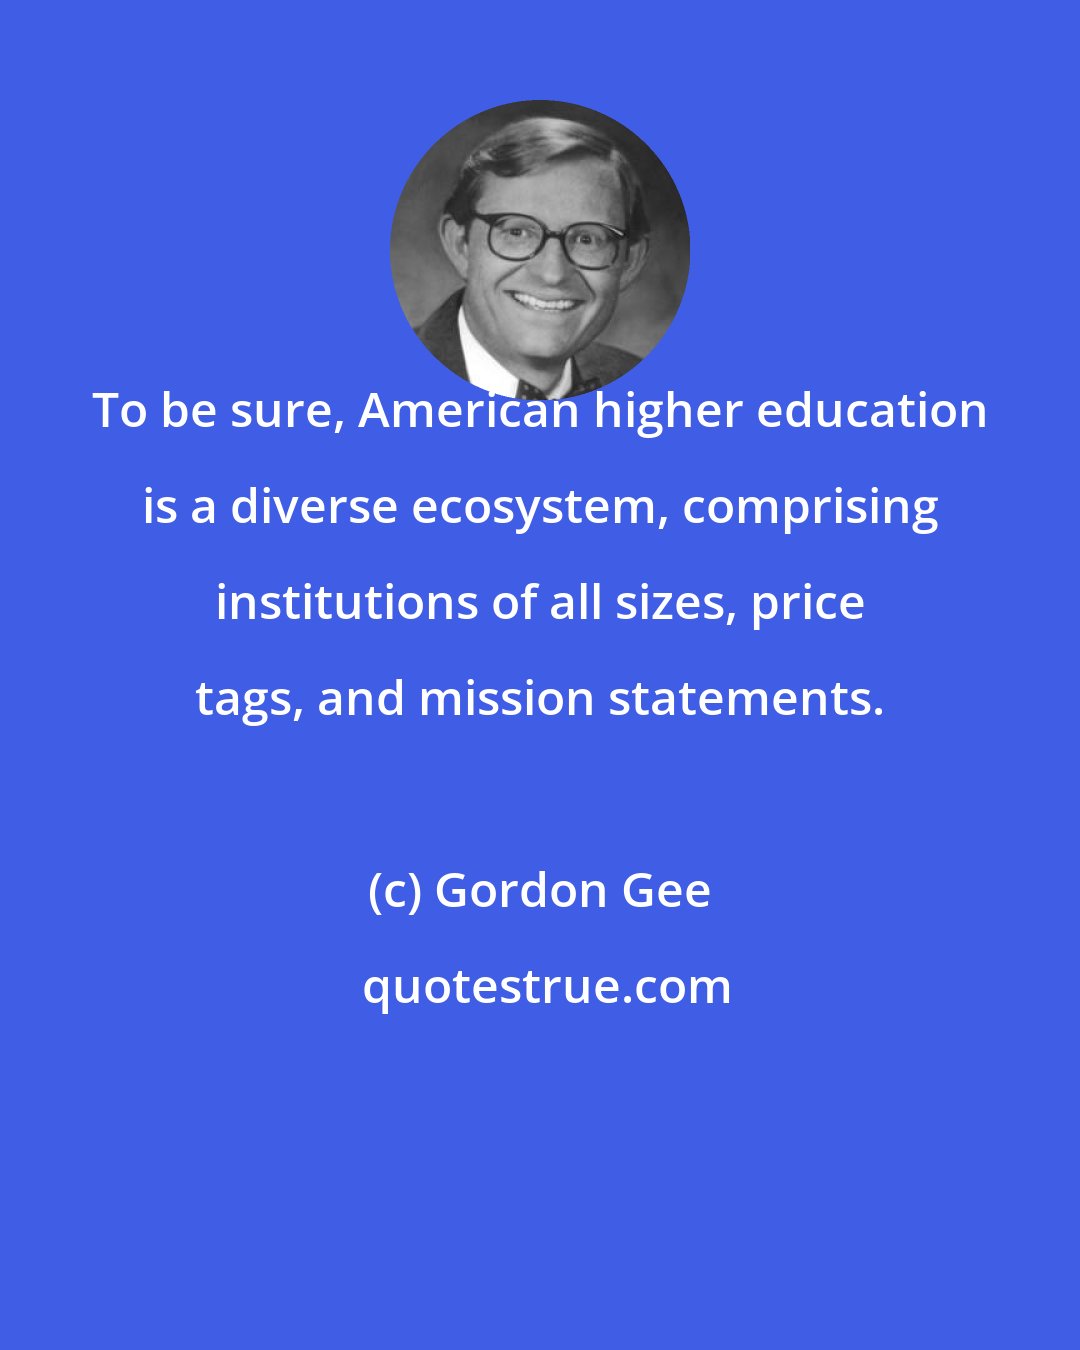 Gordon Gee: To be sure, American higher education is a diverse ecosystem, comprising institutions of all sizes, price tags, and mission statements.